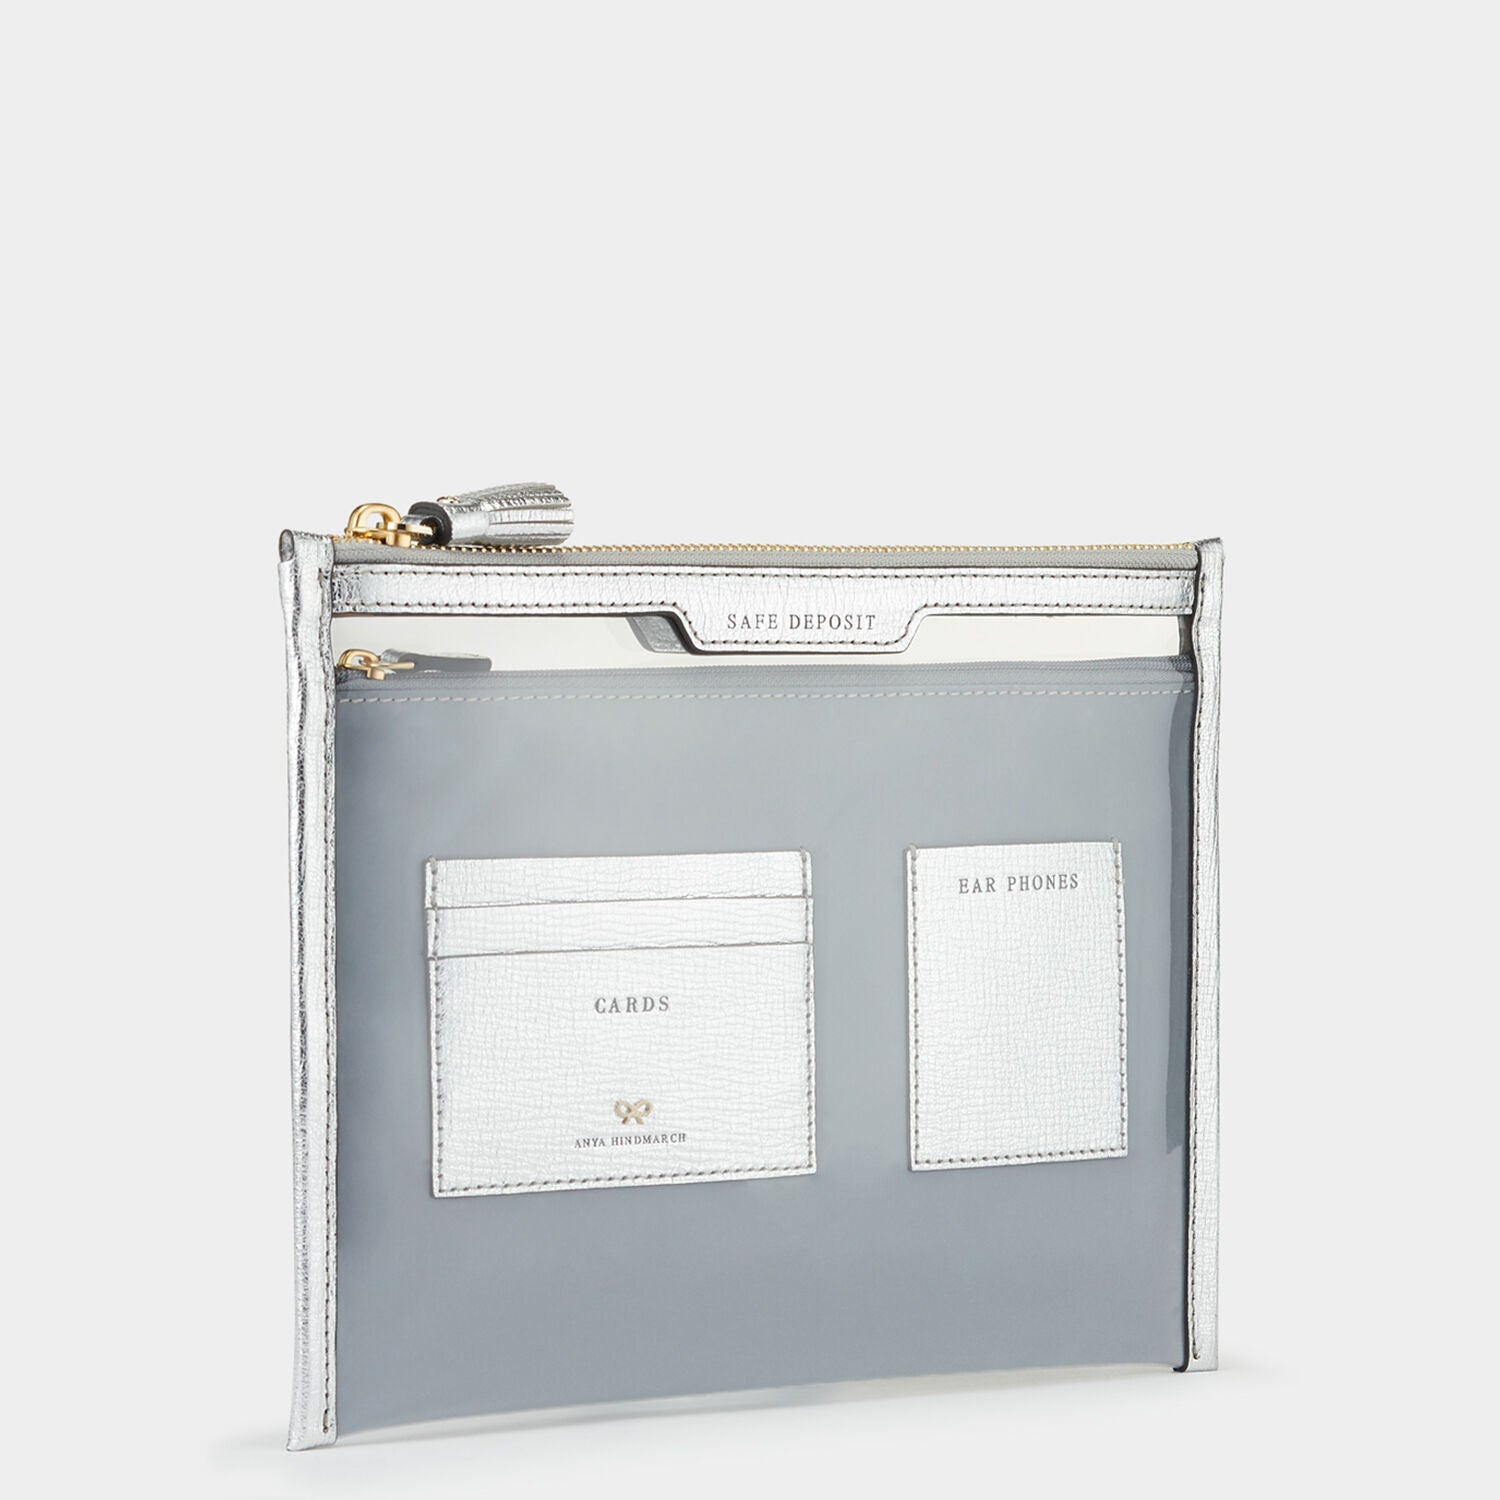 Safe Deposit Case -

                  
                    Plastic in Silver -
                  

                  Anya Hindmarch US
